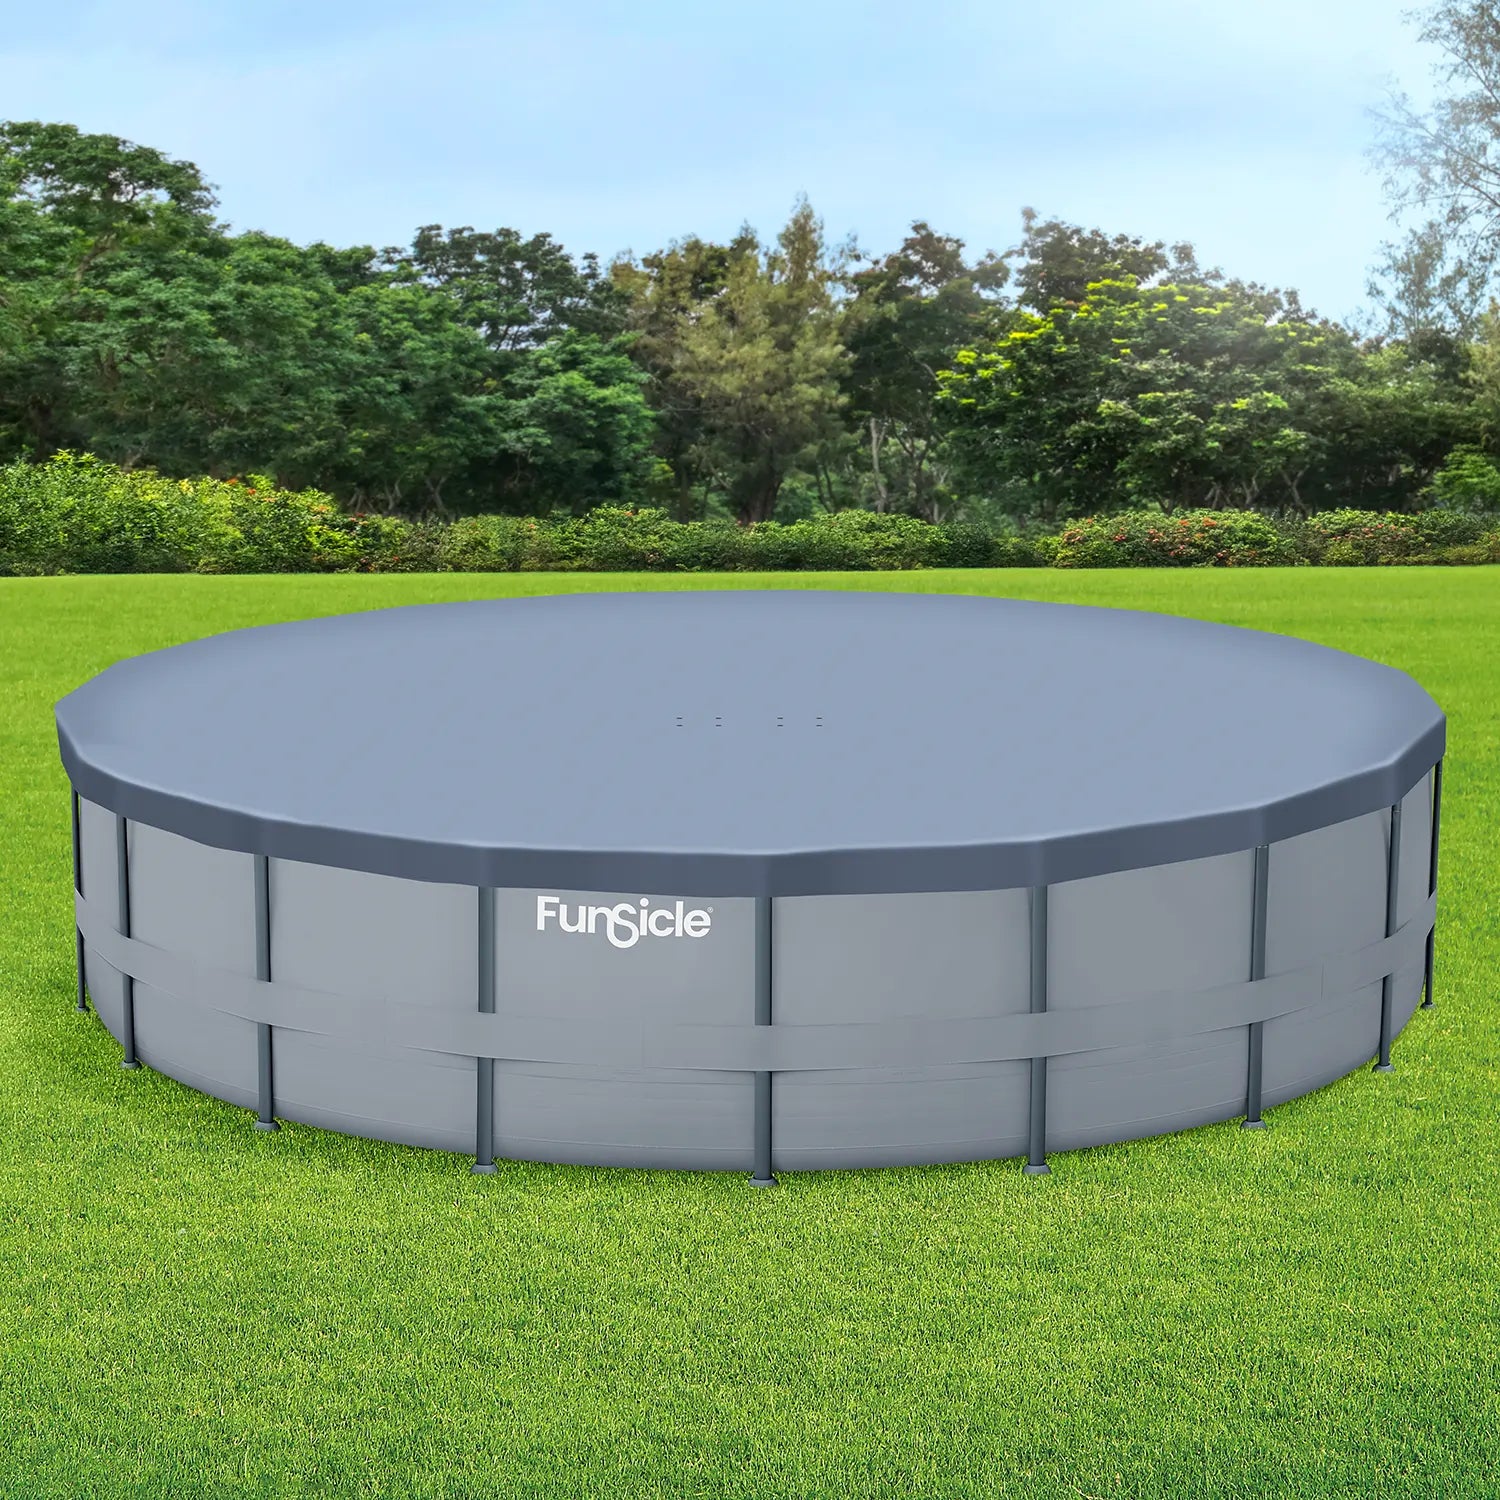 Funsicle 26ft Frame Pool Cover on a grass background